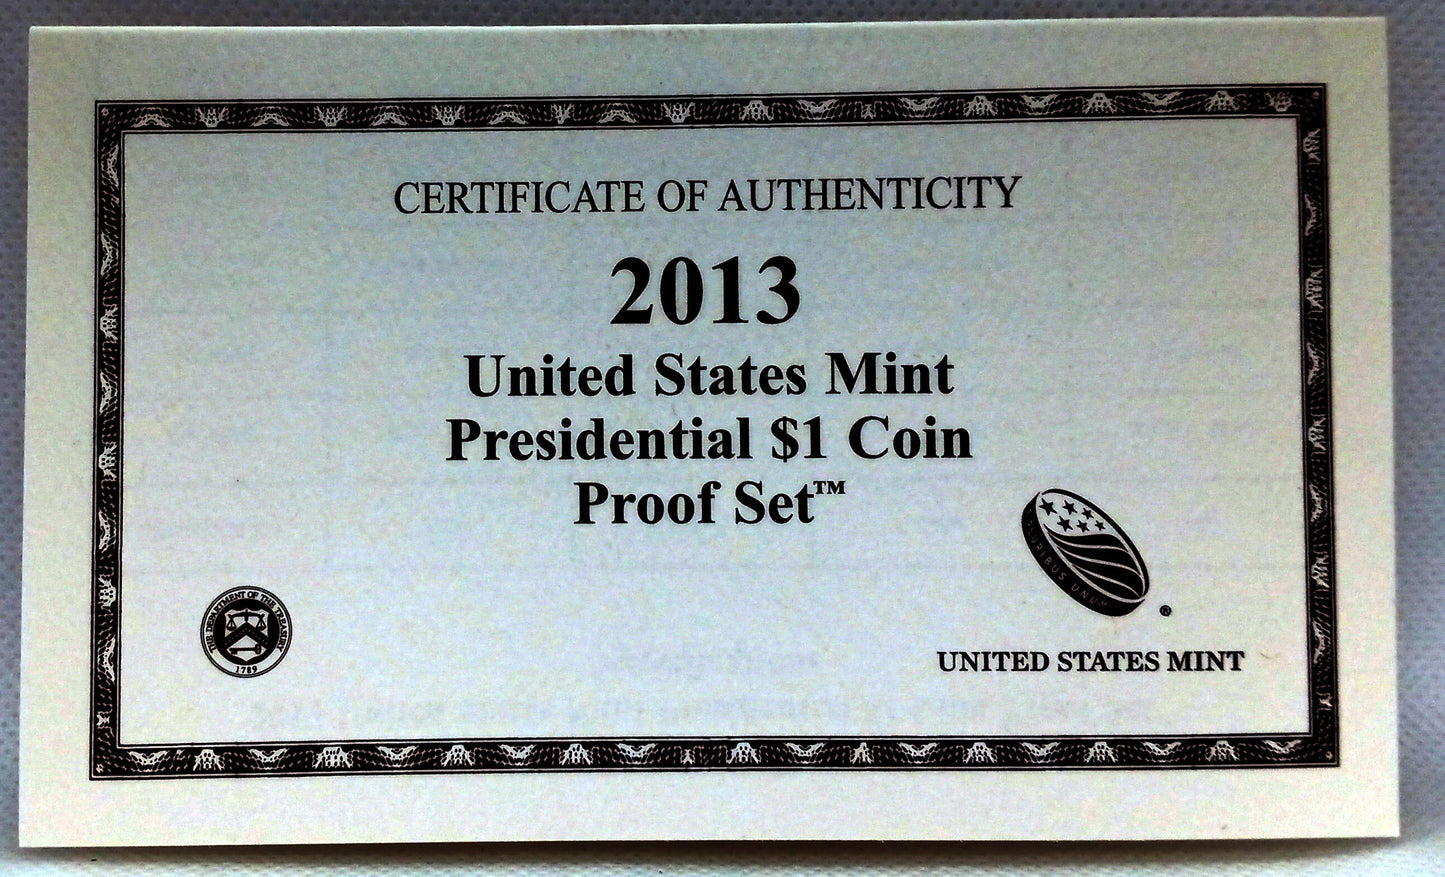 2013 United States Mint PRESIDENTIAL DOLLAR COIN PROOF SET With OGP & COA!